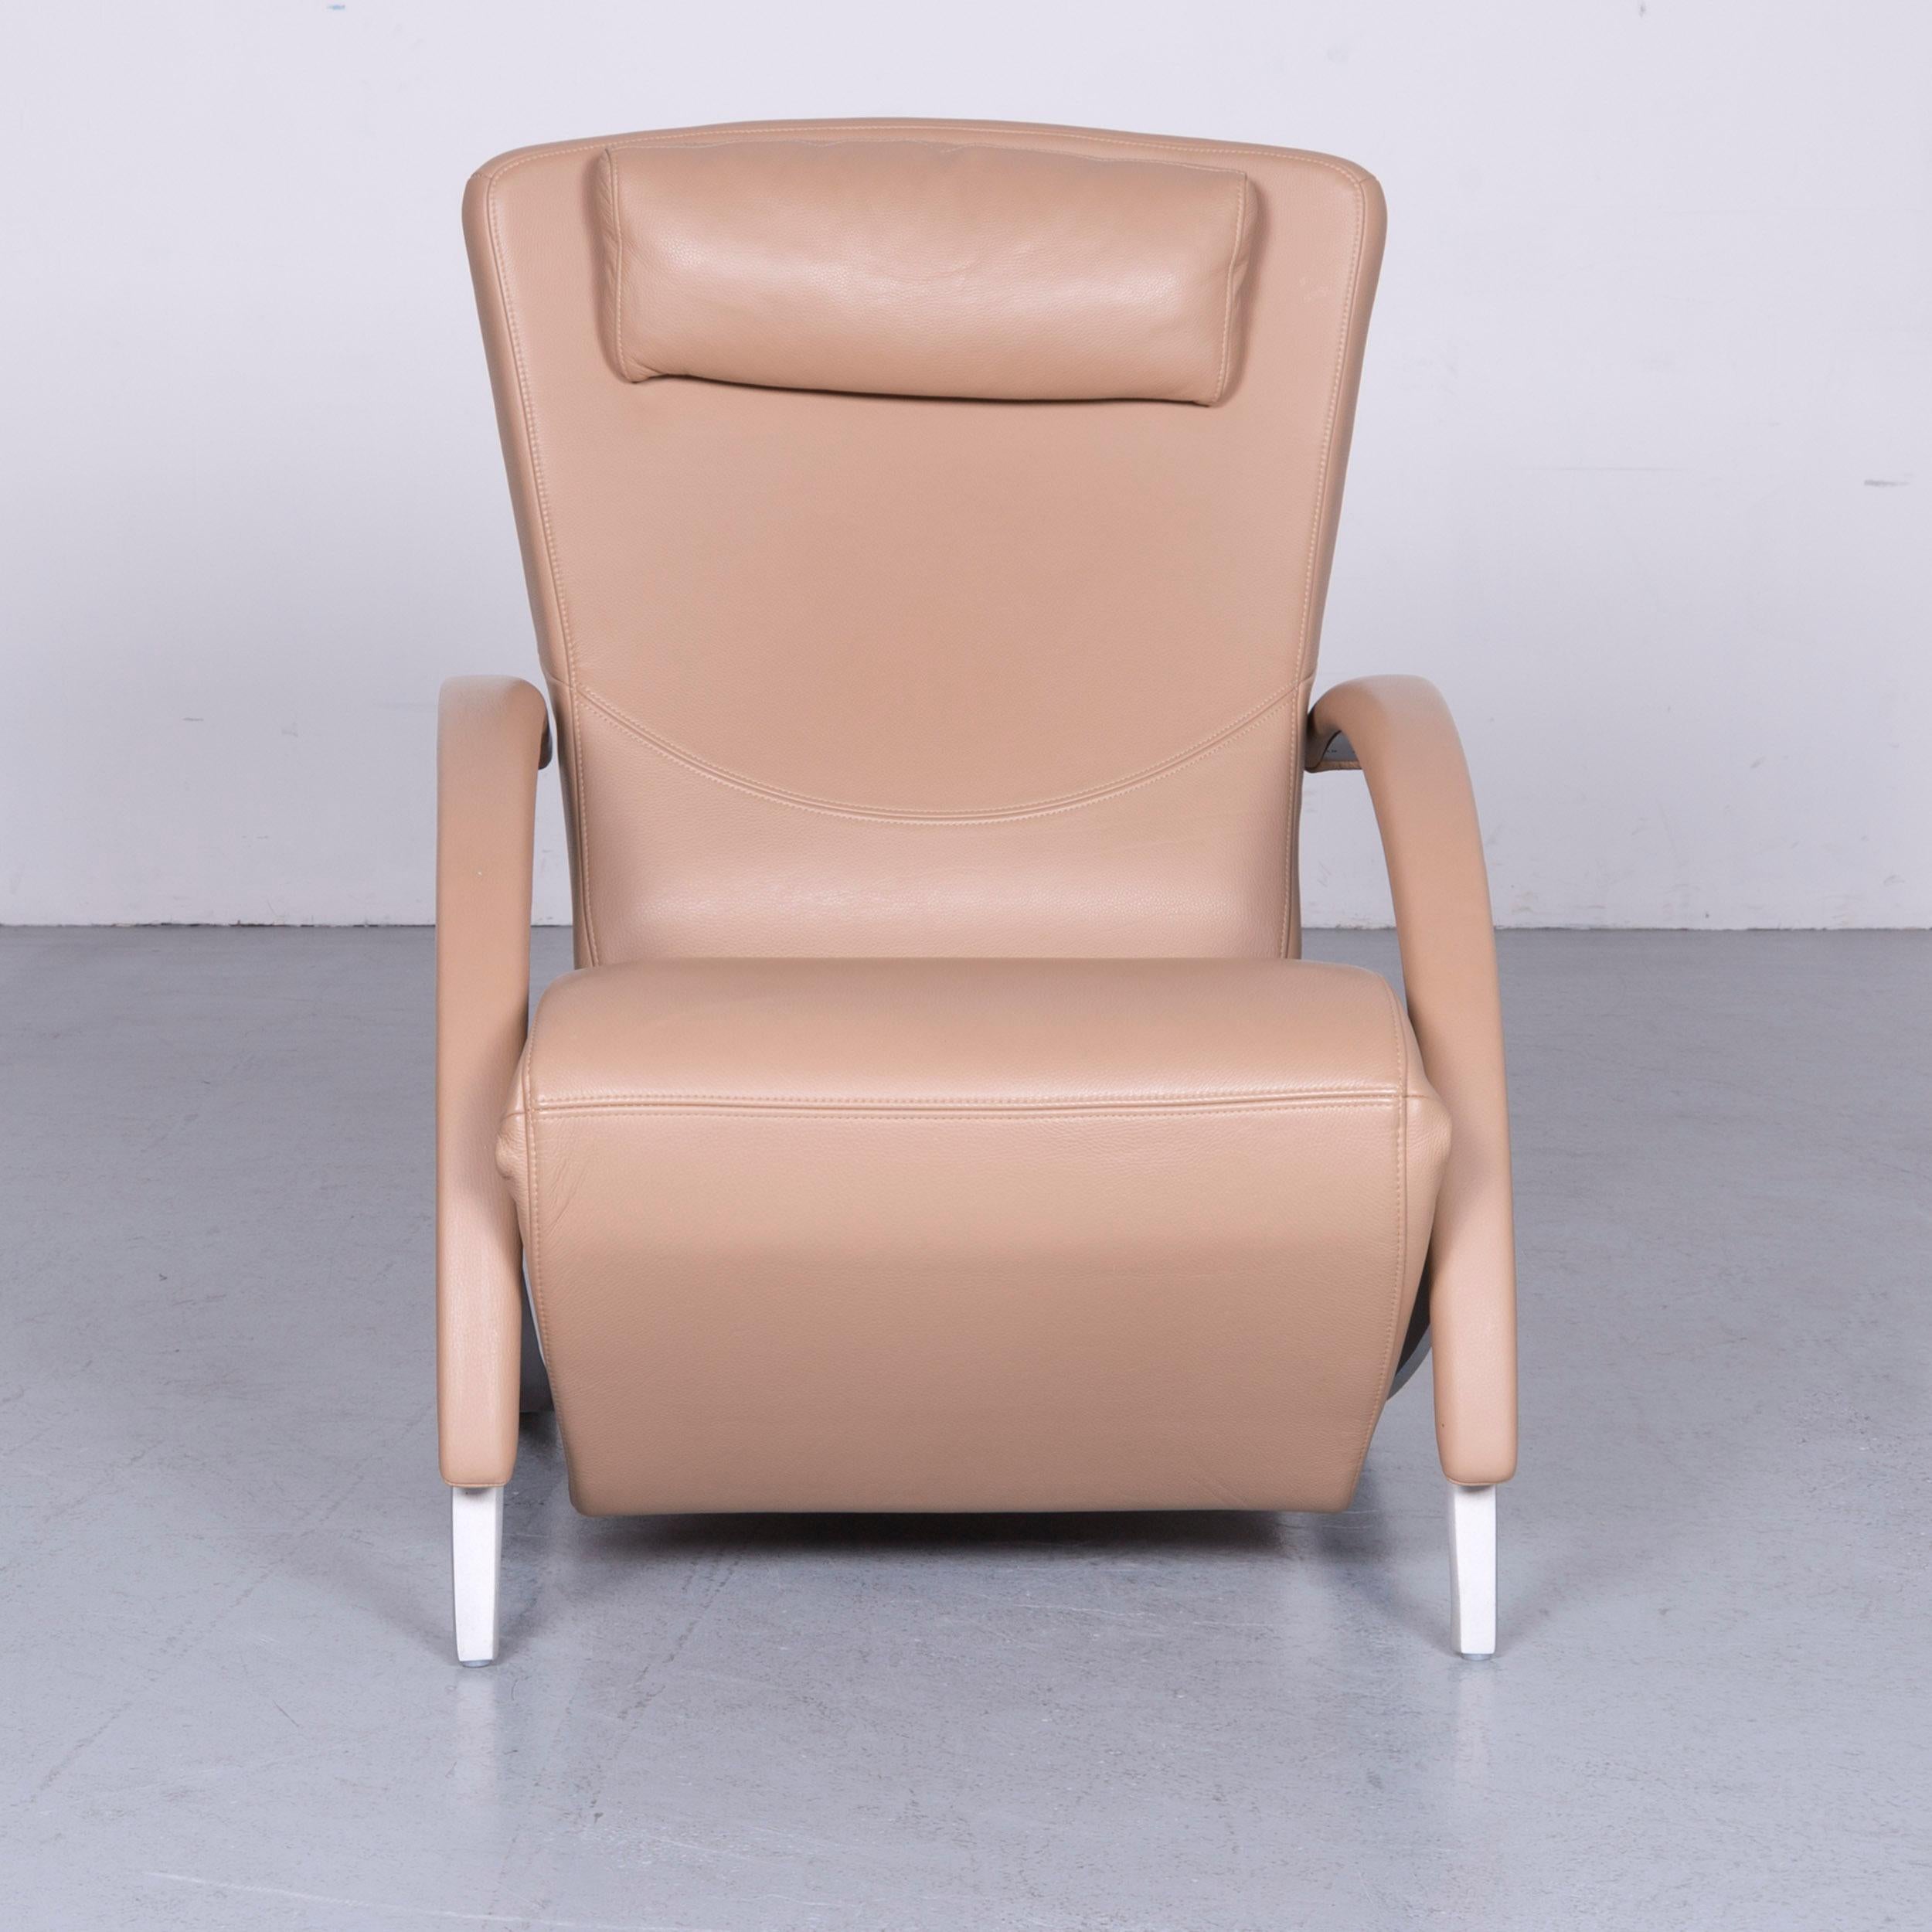 German Rolf Benz 3100 Designer Leather Armchair Beige Chair with Function